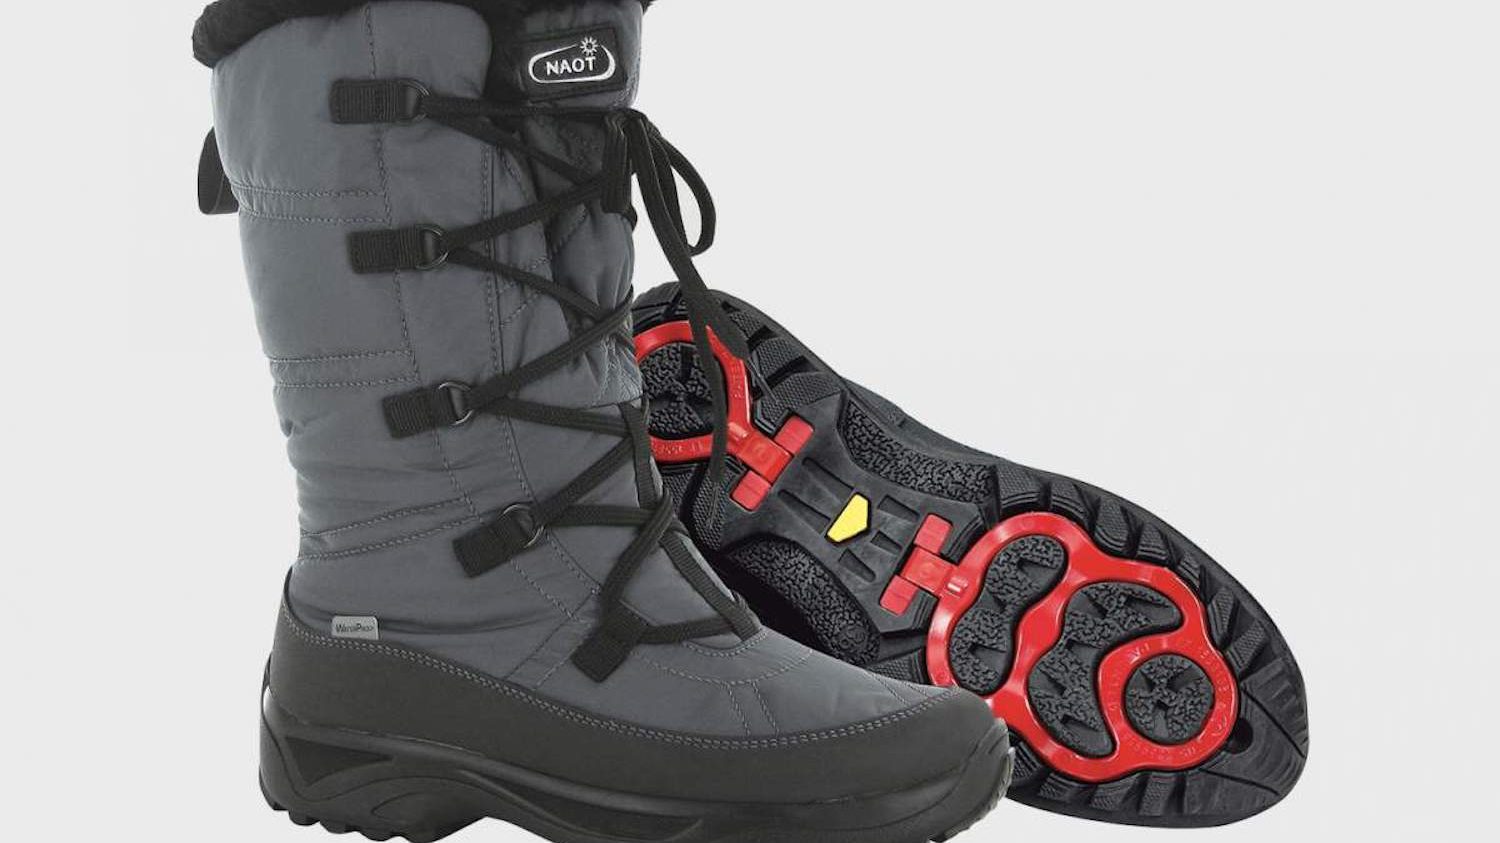 These Naot Boots Were Built With an Ice Pick to Prevent Slipping